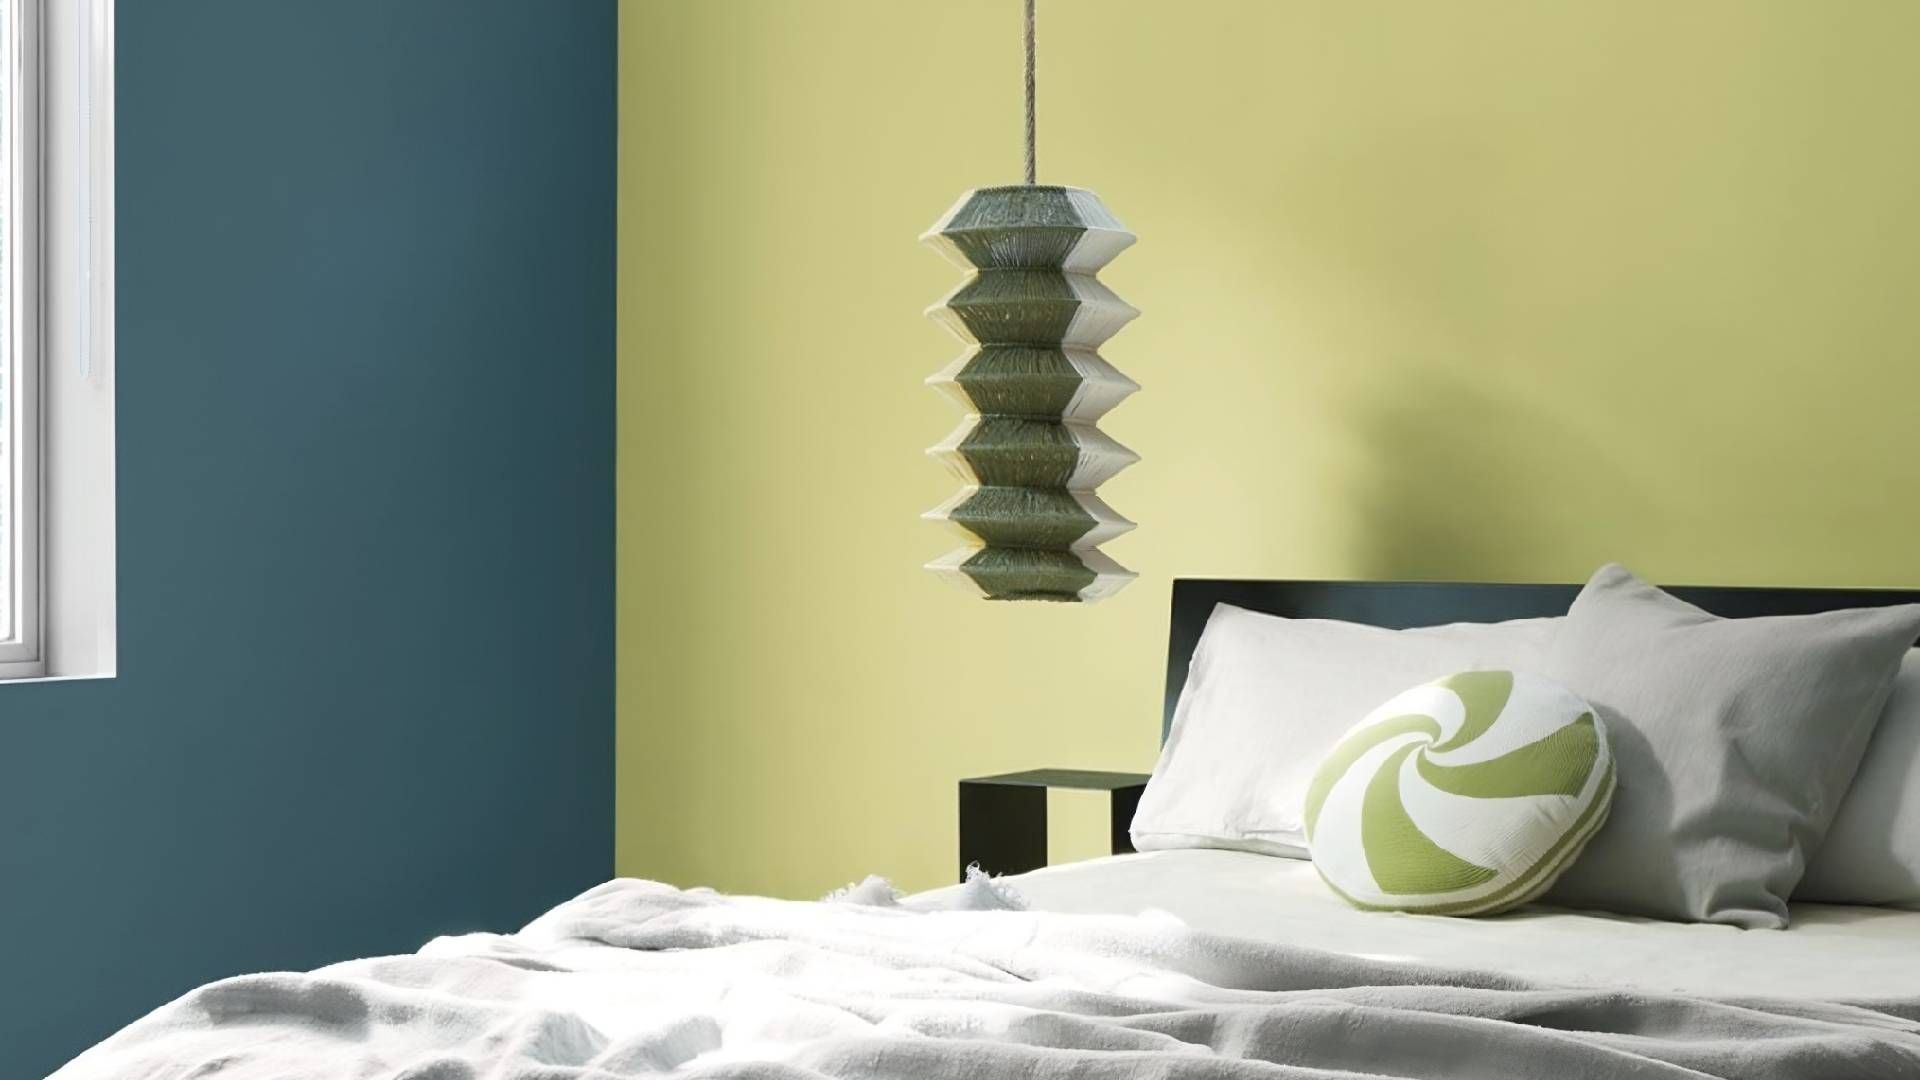 Bedroom painted with vibrant colors from the Benjamin Moore Color Stories® Collection